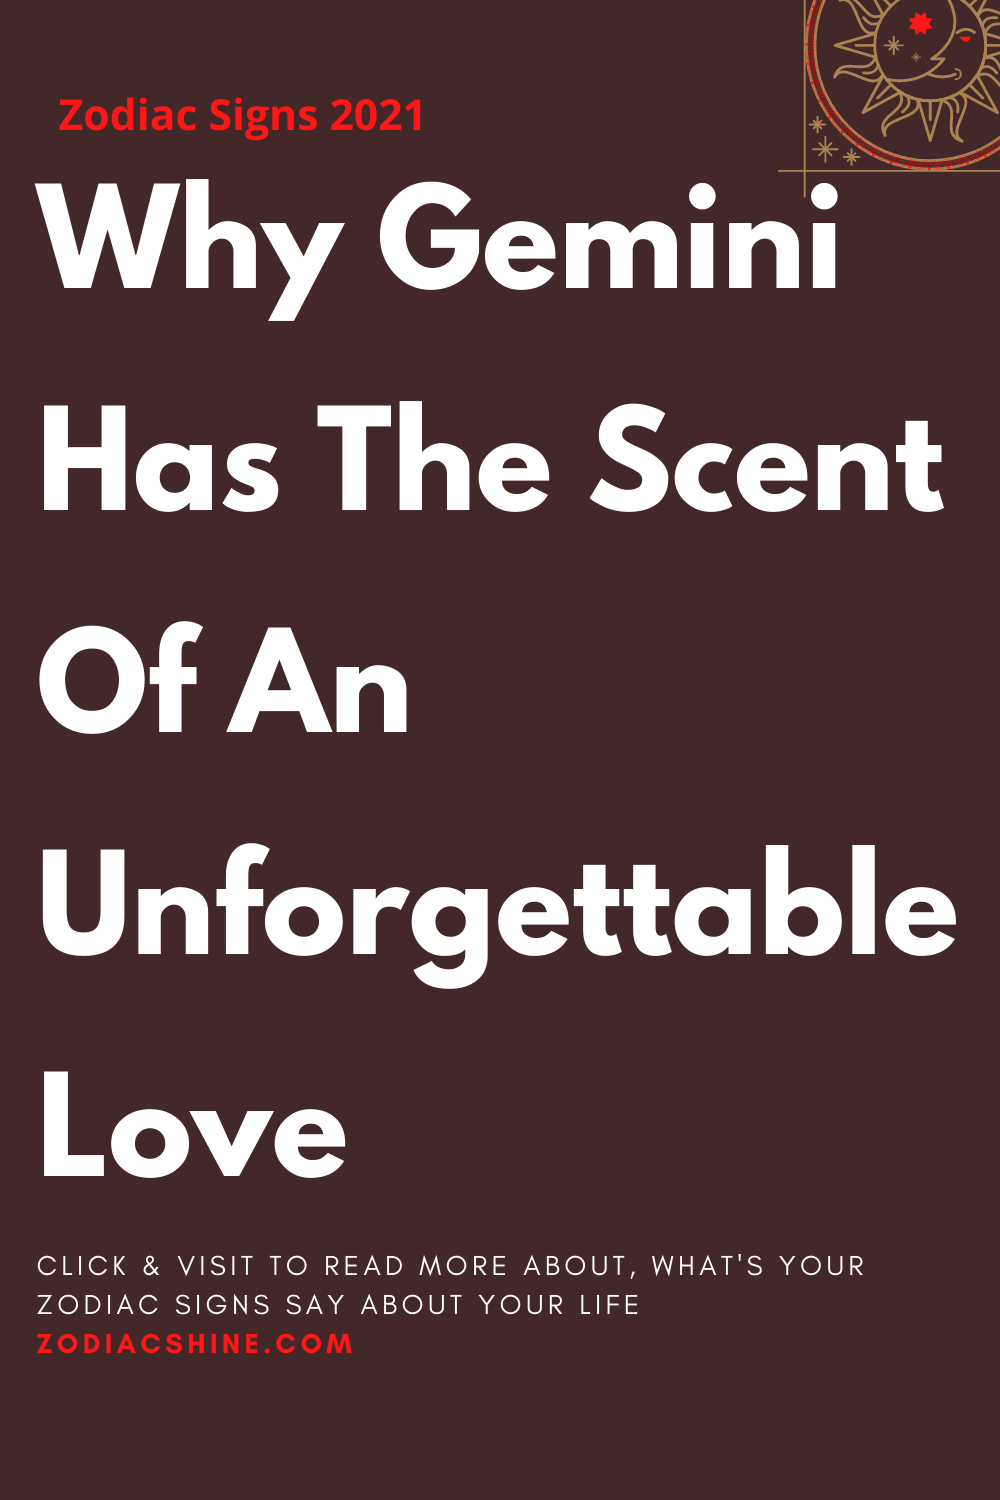 Why Gemini Has The Scent Of An Unforgettable Love